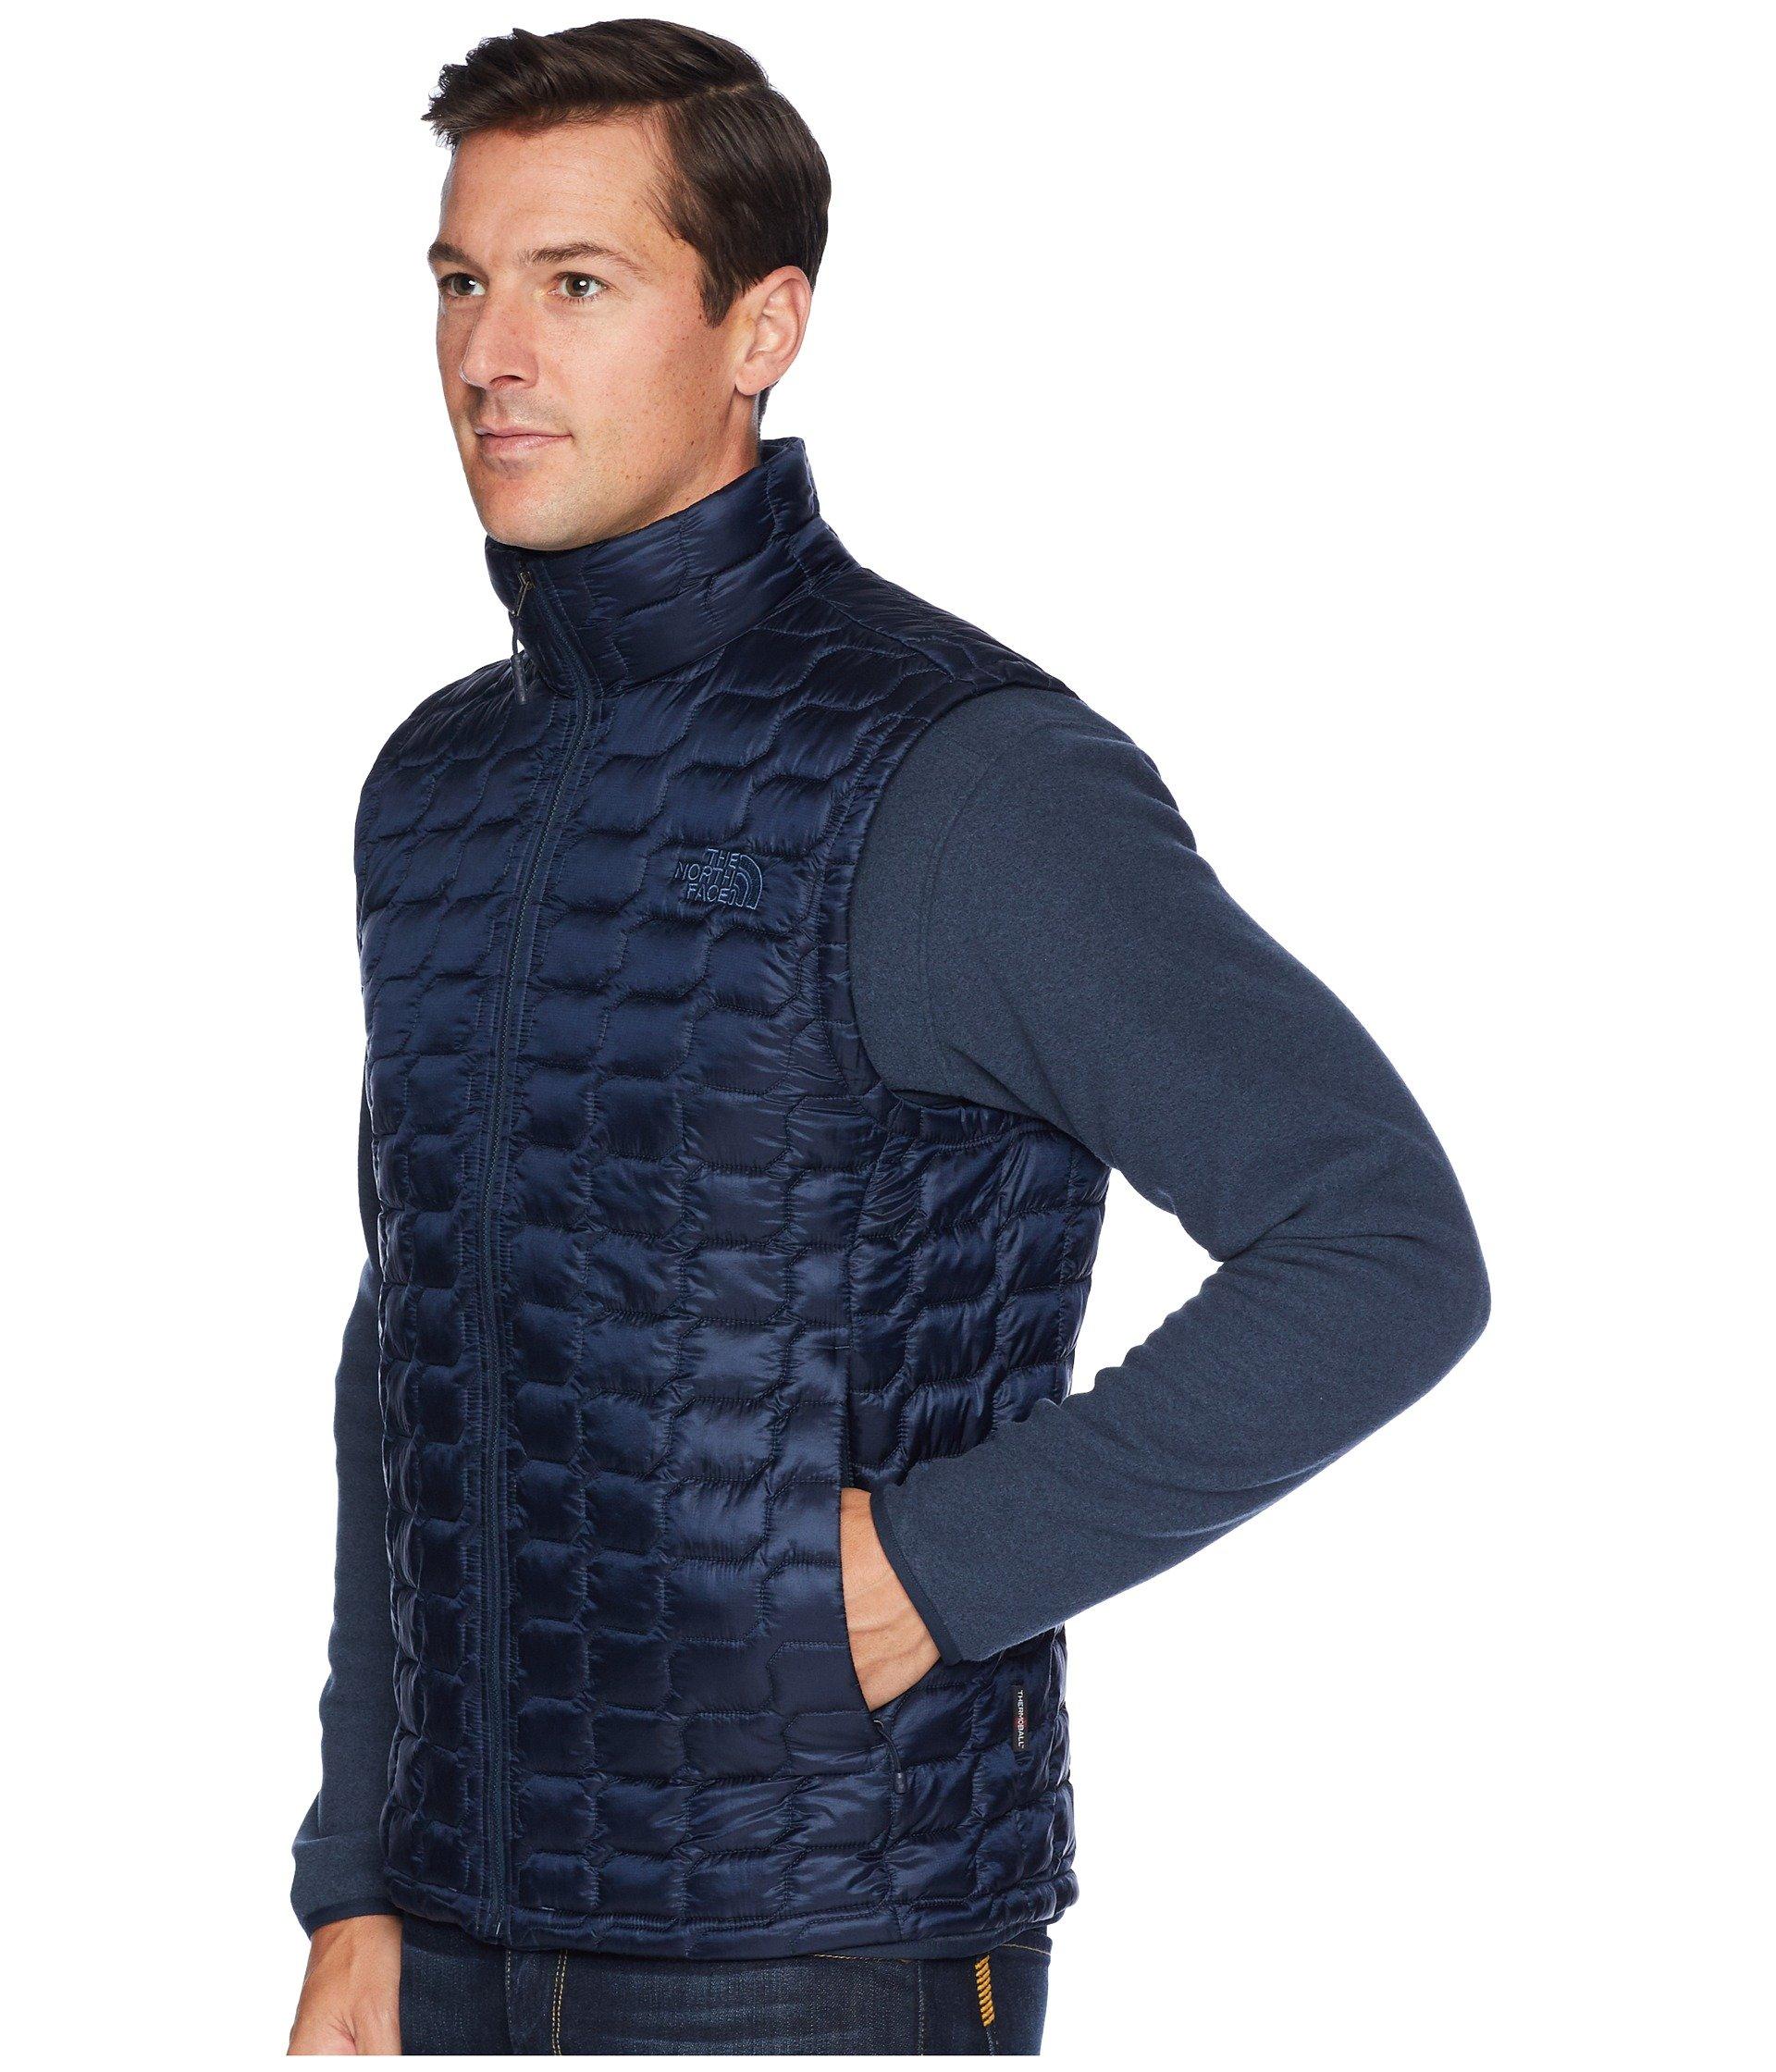 north face thermoball vest men